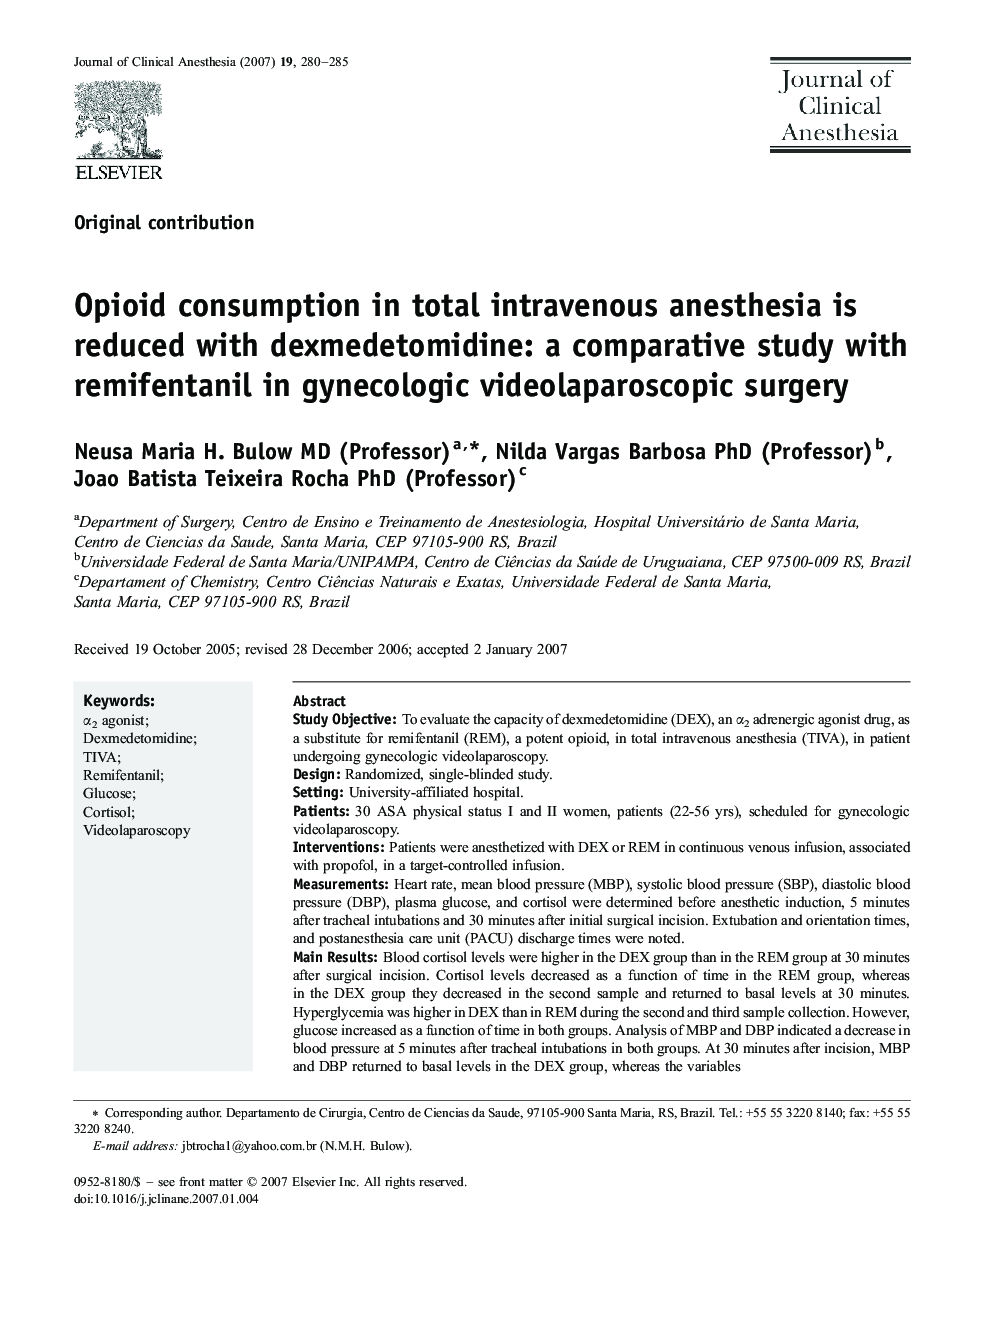 Opioid consumption in total intravenous anesthesia is reduced with dexmedetomidine: a comparative study with remifentanil in gynecologic videolaparoscopic surgery